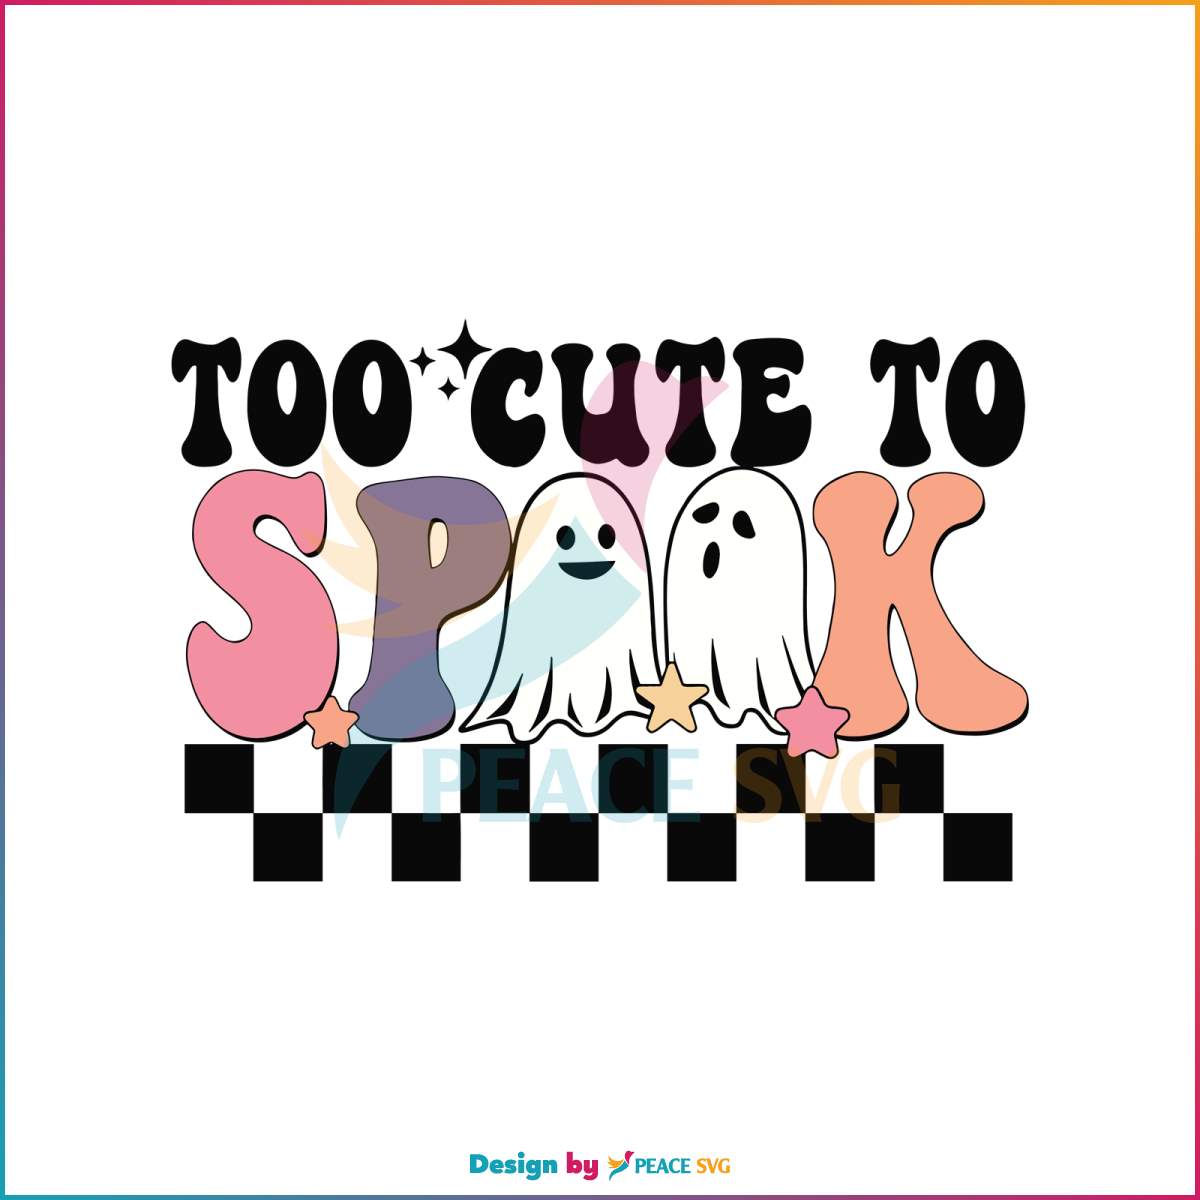 retro-groovy-too-cute-to-spook-halloween-ghost-svg-file